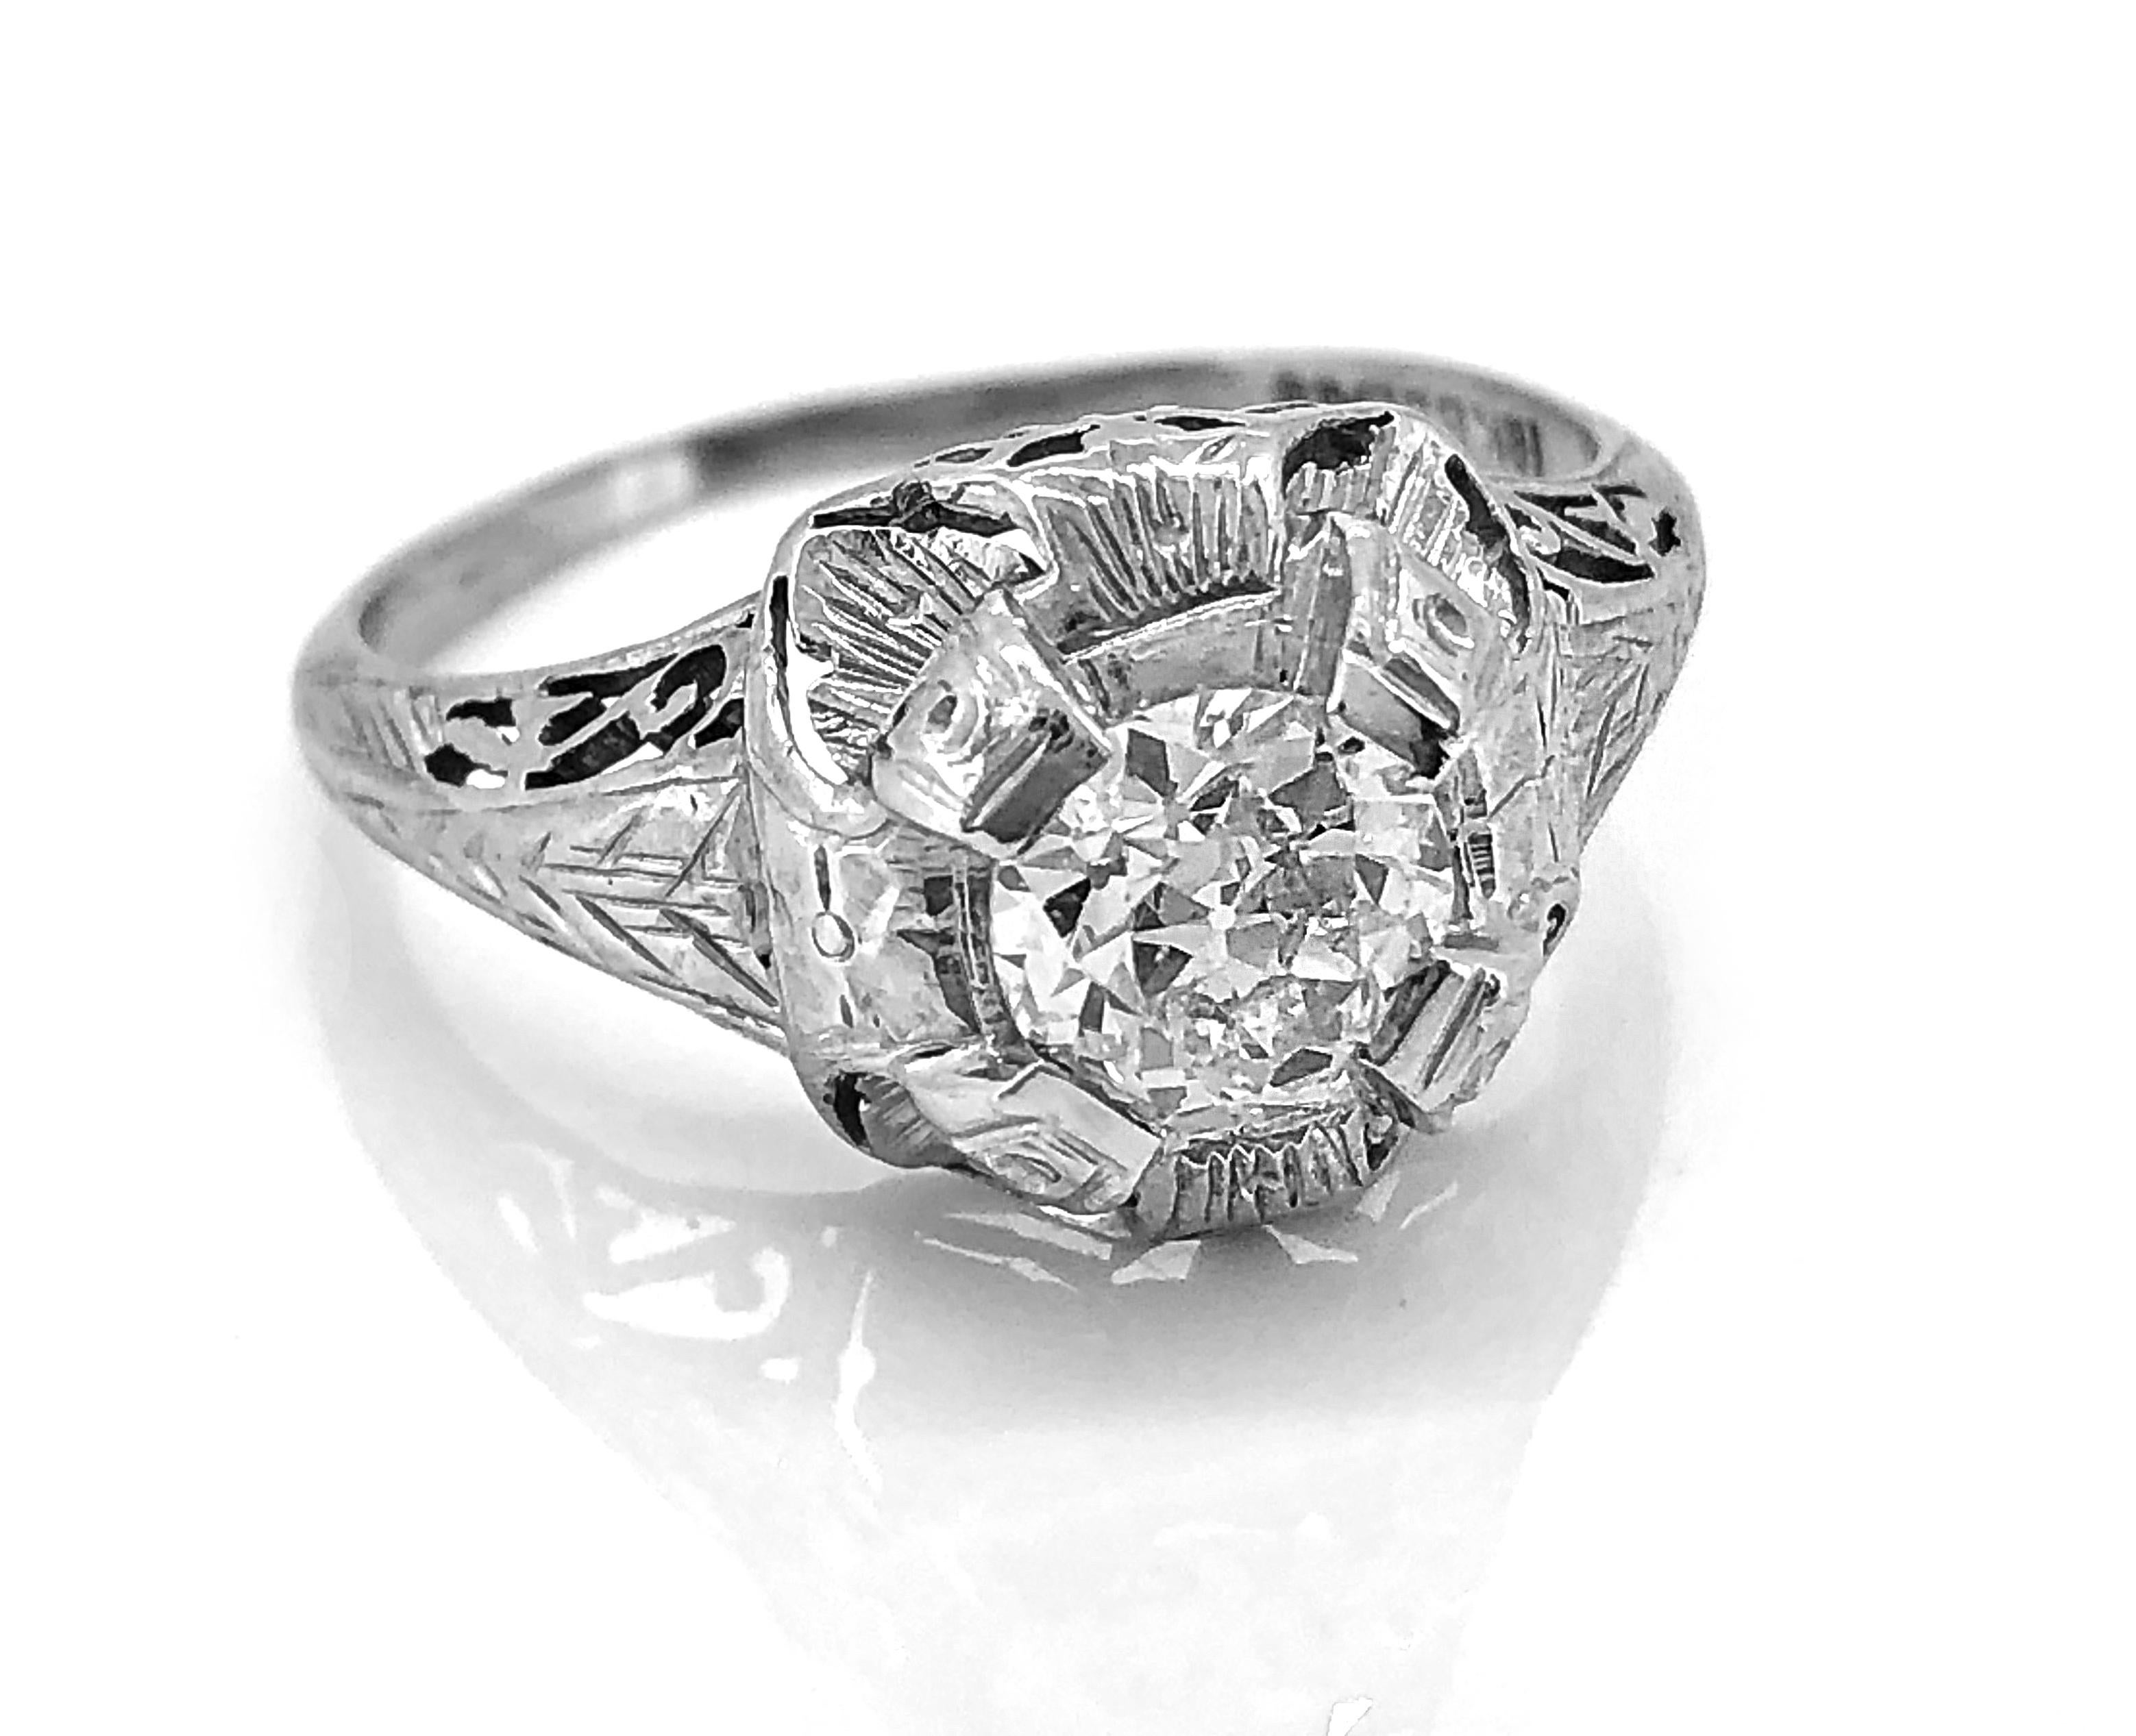 A distinctively crafted 18K white gold and diamond Antique engagement ring by 